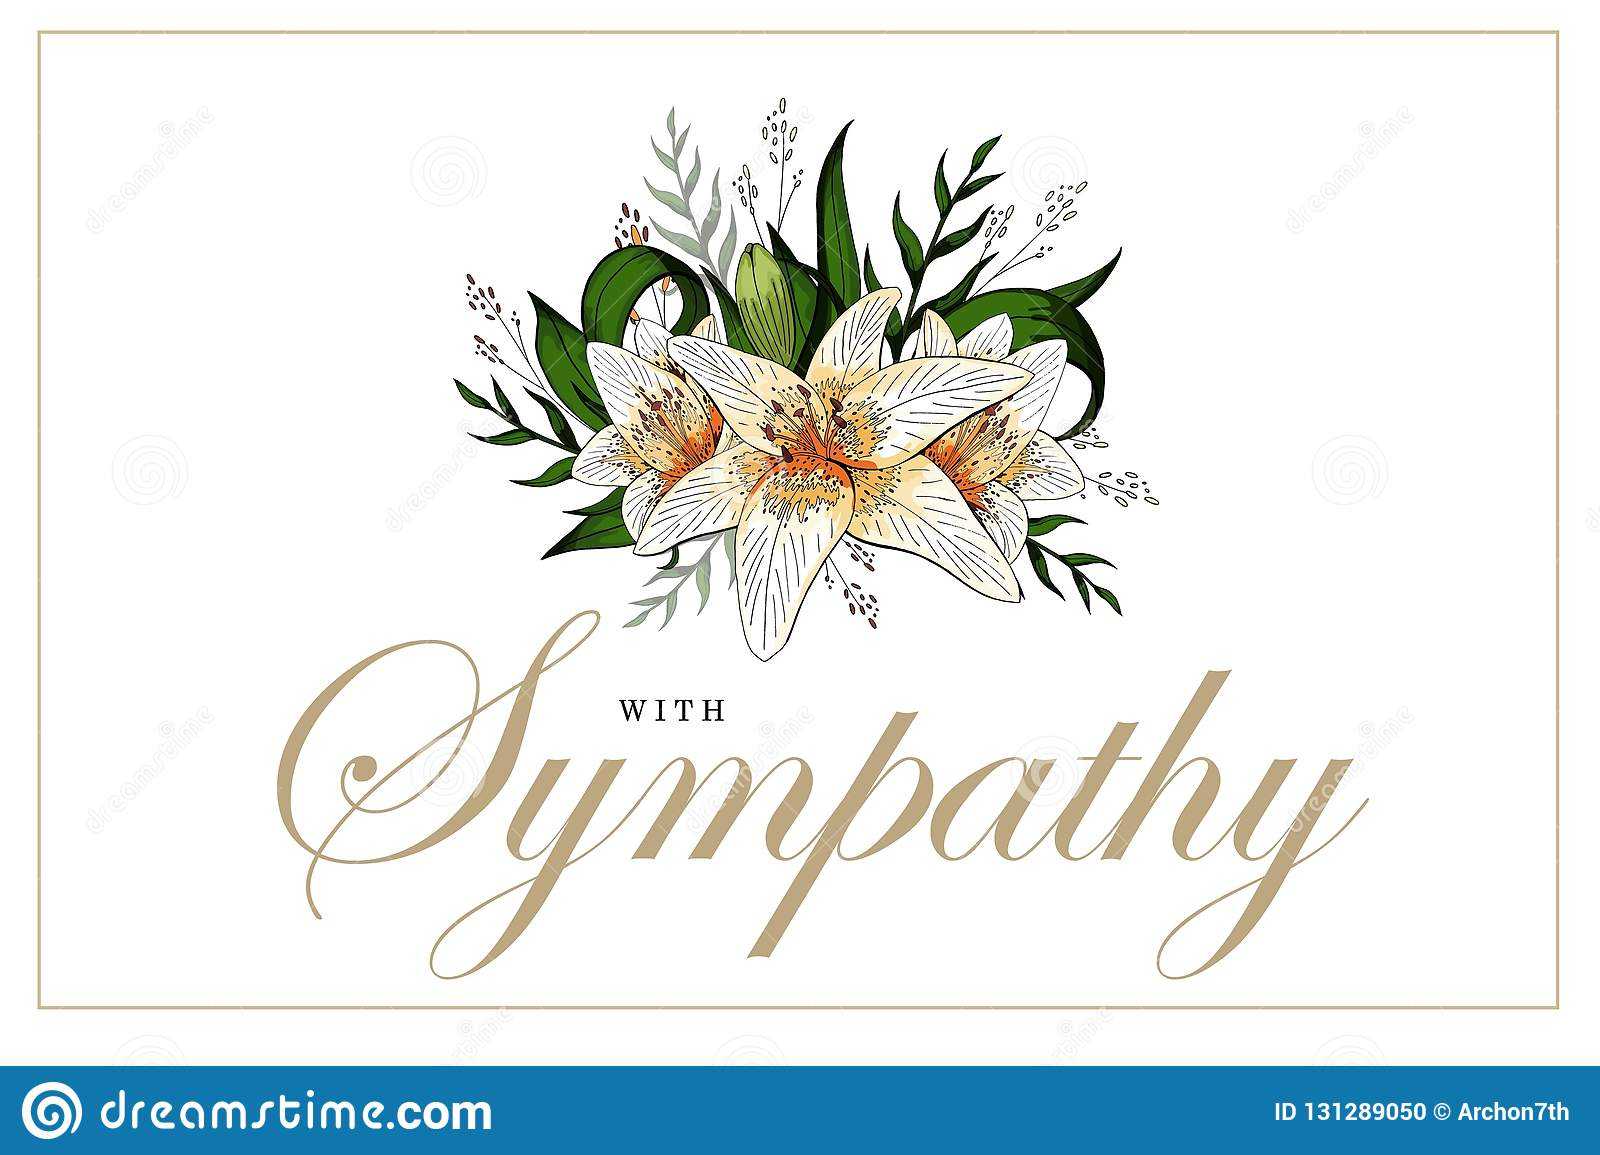 Condolences Sympathy Card Floral Lily Bouquet And Lettering With Sorry For Your Loss Card Template